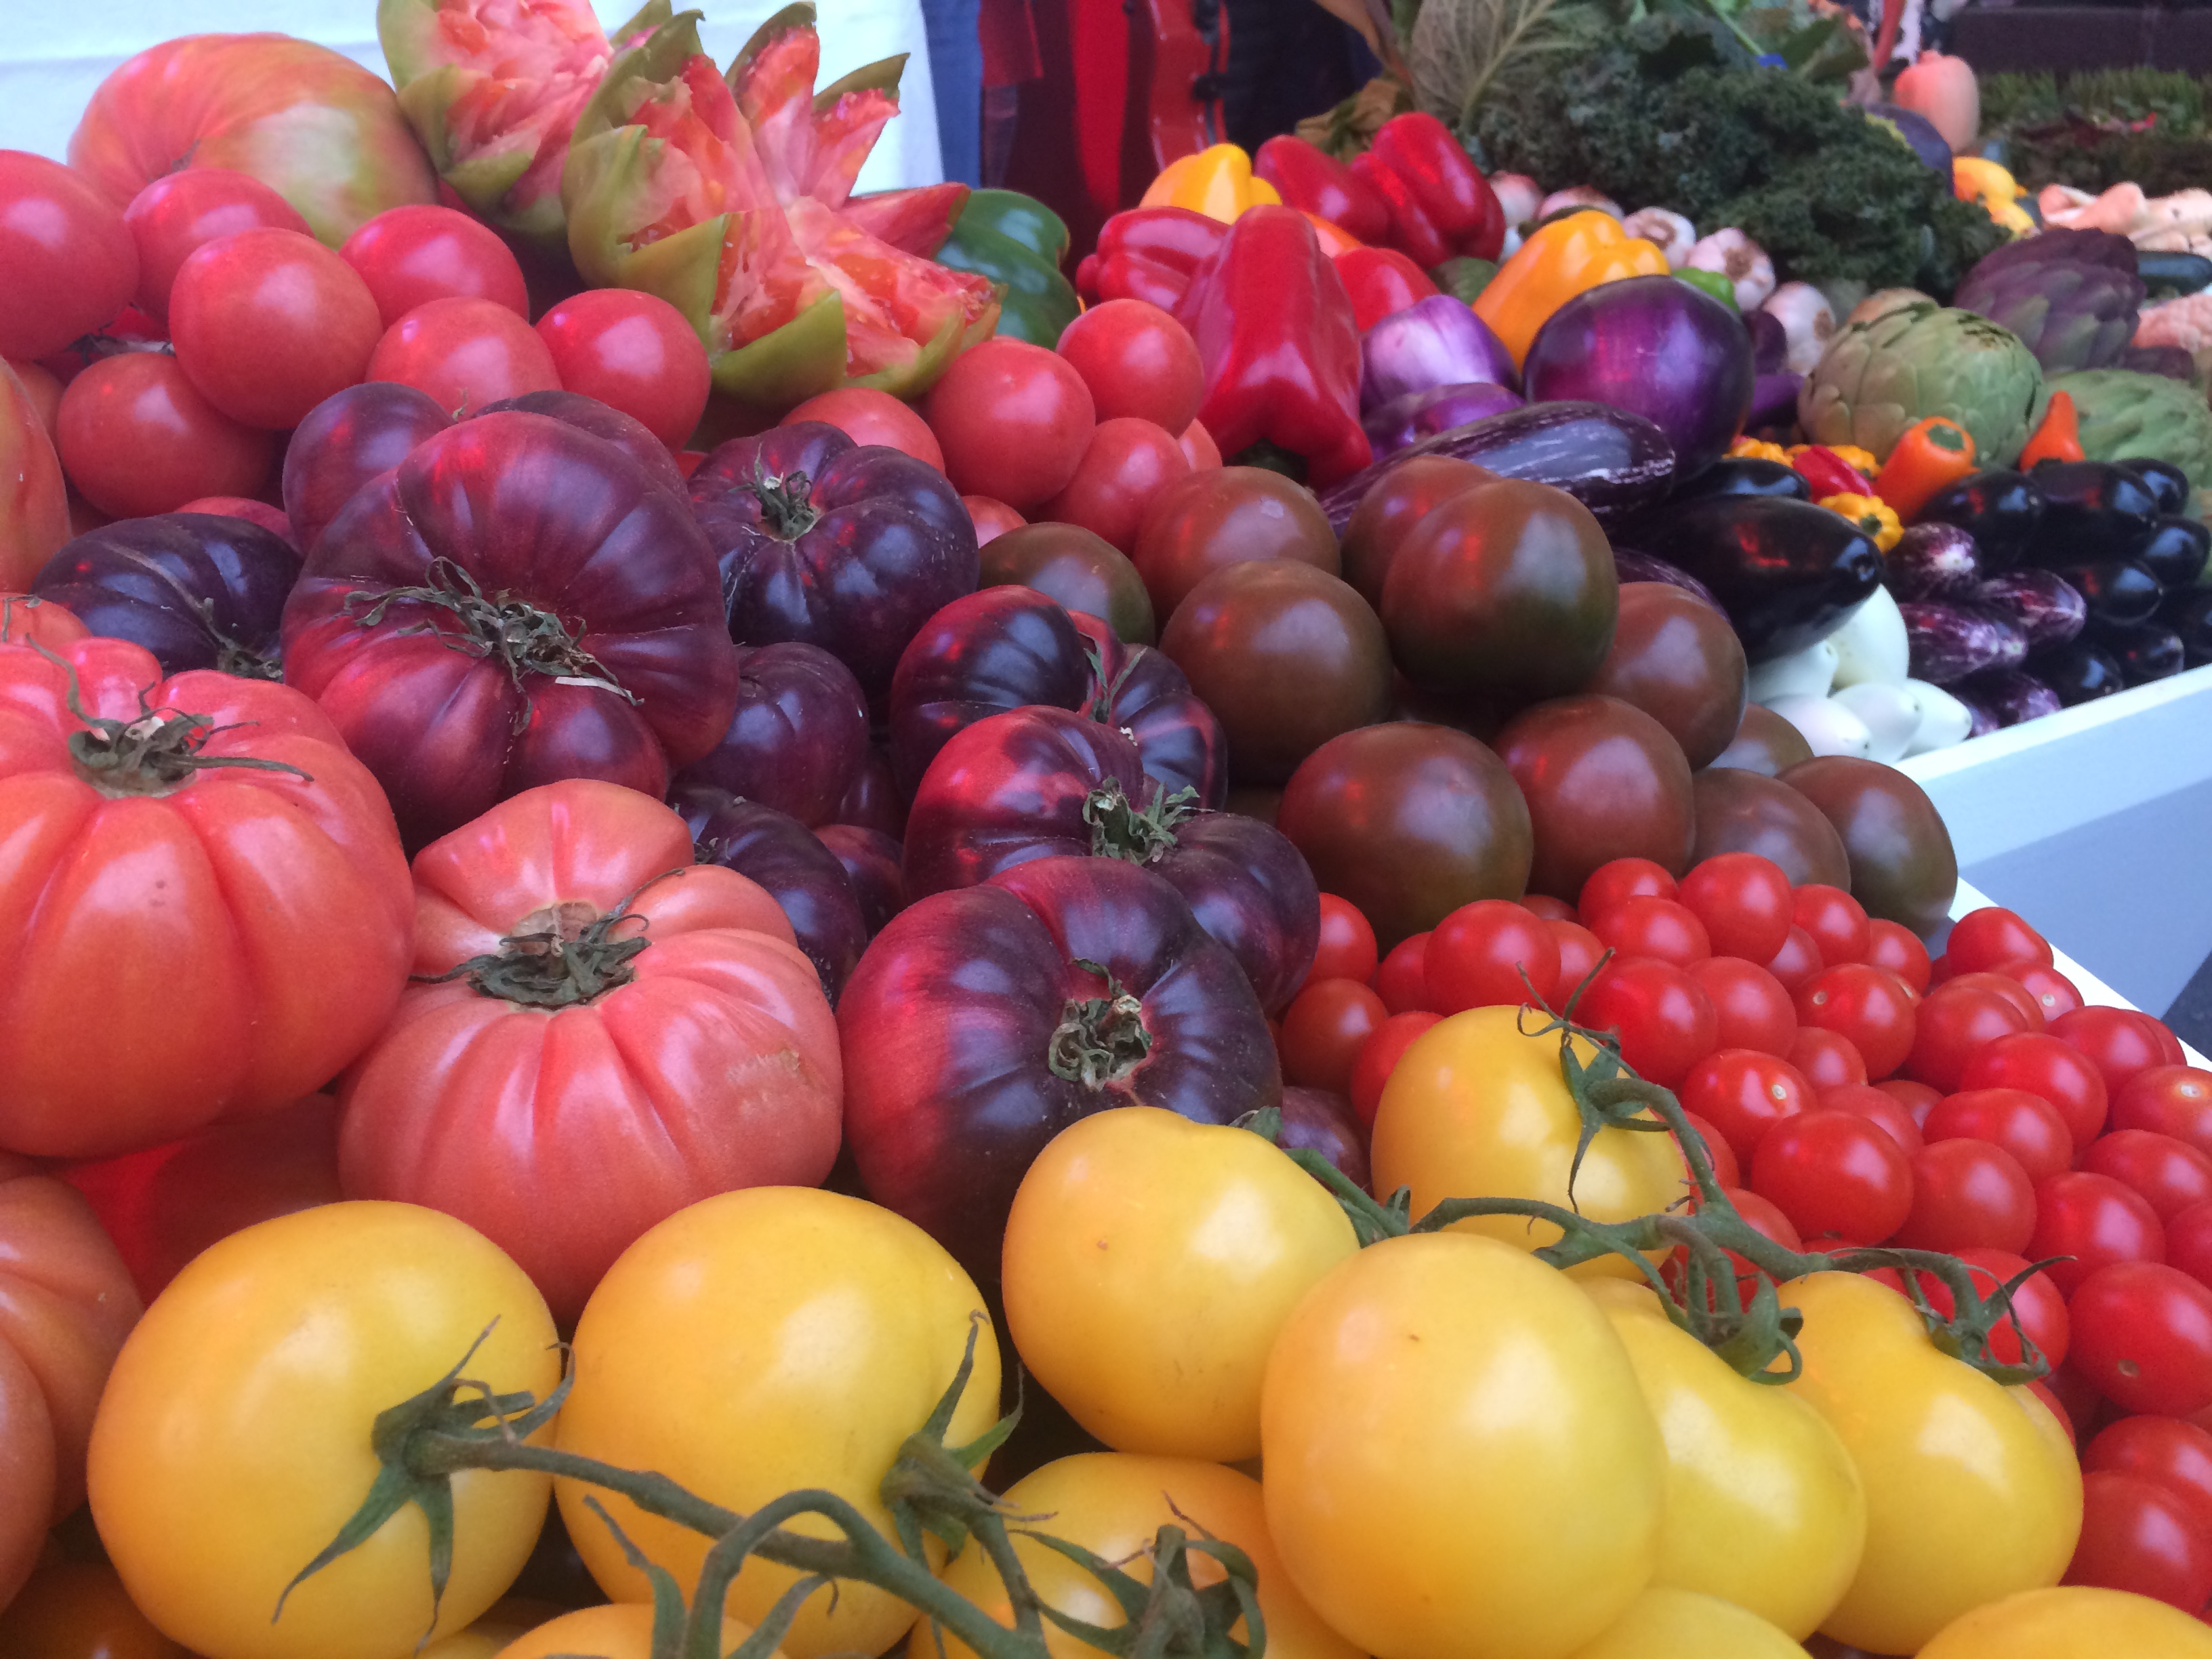 Shop and eat like the locals in the food markets in Madrid!